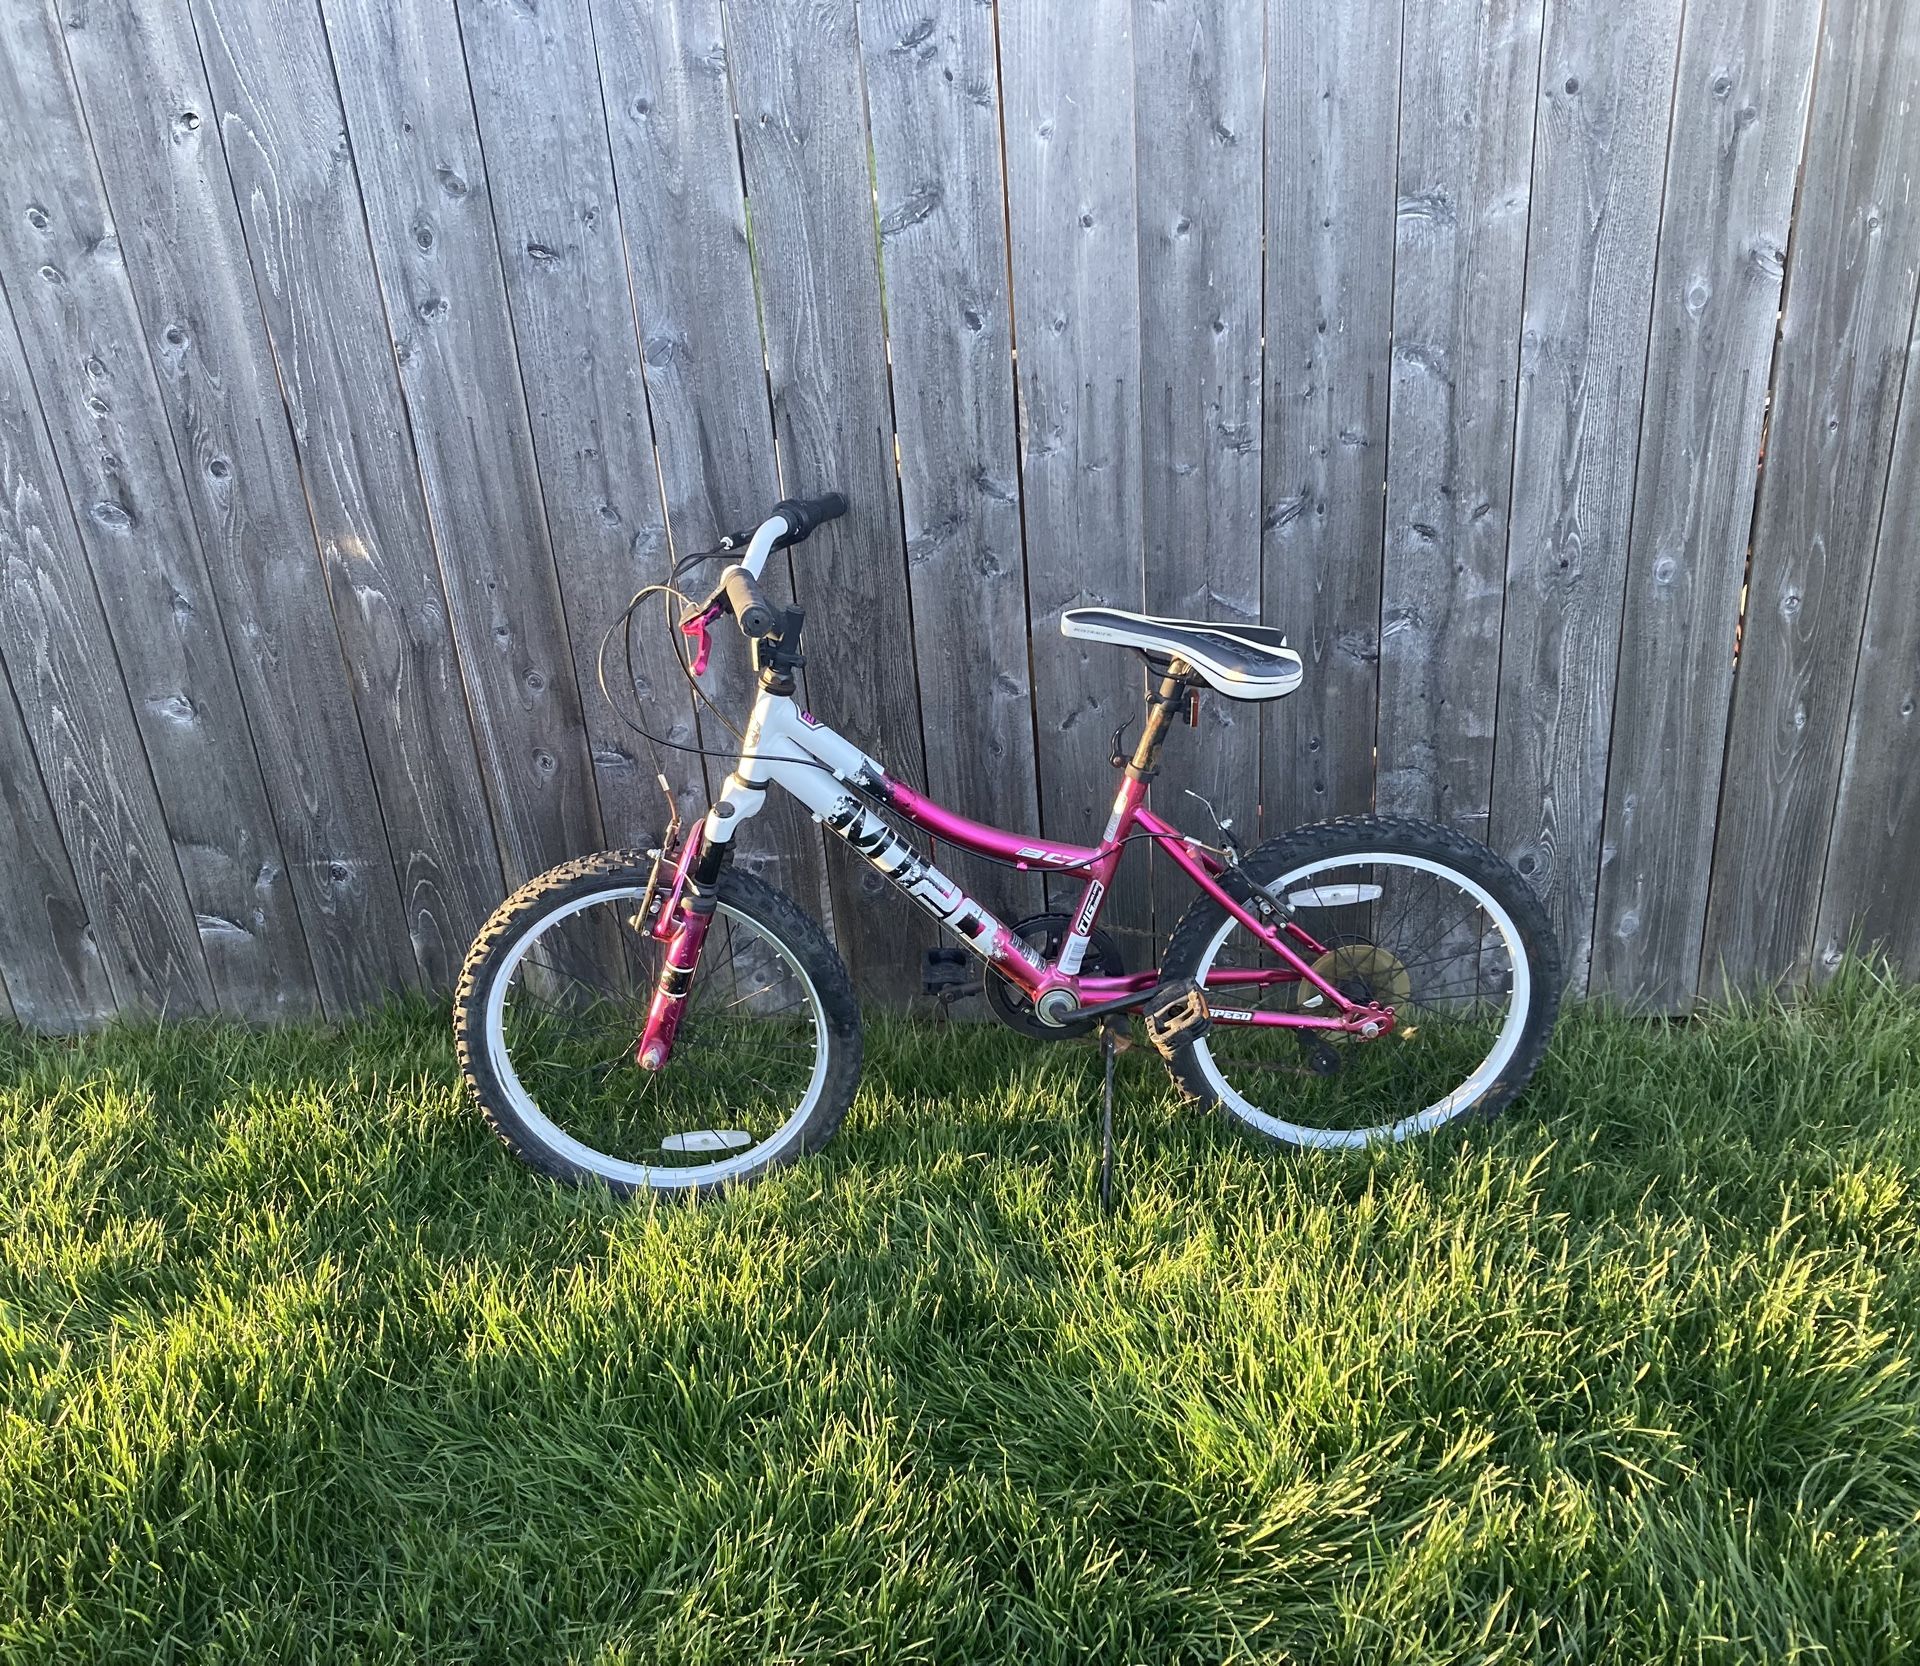 NEEDS WORK 20" Girls' BCA MT20 Mountain Bike TLC bicycle tires Project